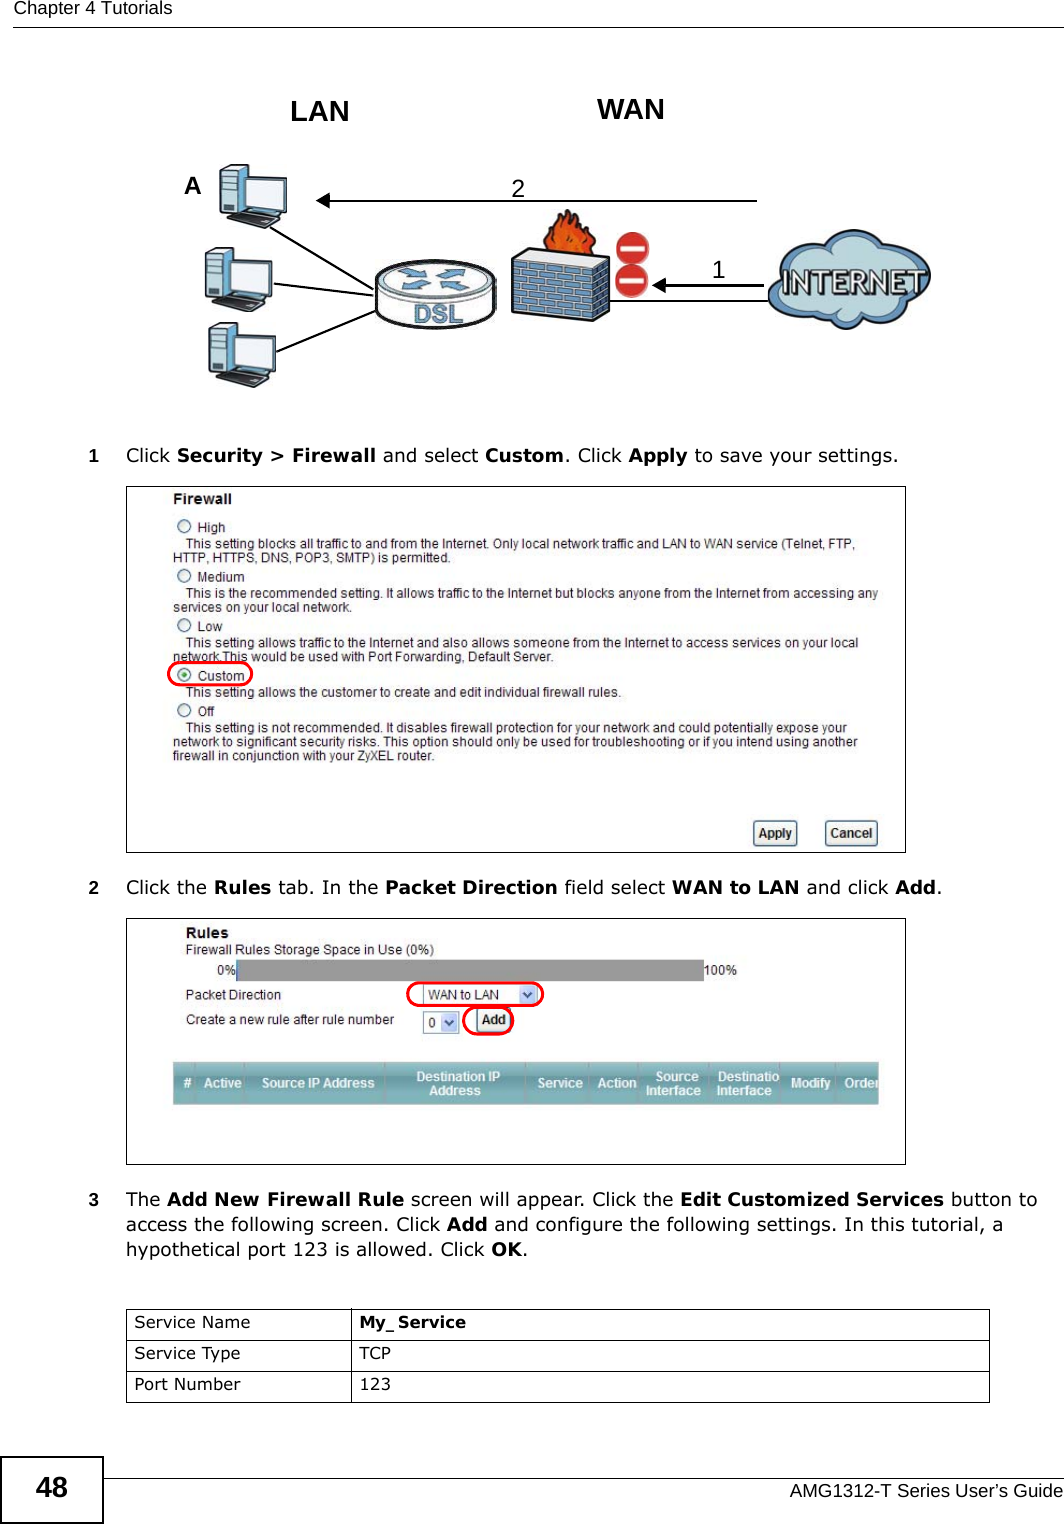 Chapter 4 TutorialsAMG1312-T Series User’s Guide48Tutorial: NAT Port Forwarding Setup 1Click Security &gt; Firewall and select Custom. Click Apply to save your settings.Tutorial: Advanced &gt; QoS 2Click the Rules tab. In the Packet Direction field select WAN to LAN and click Add.Tutorial: Advanced &gt; QoS &gt; Queue Setup3The Add New Firewall Rule screen will appear. Click the Edit Customized Services button to access the following screen. Click Add and configure the following settings. In this tutorial, a hypothetical port 123 is allowed. Click OK.WANLAN12AService Name My_Service Service Type TCPPort Number 123